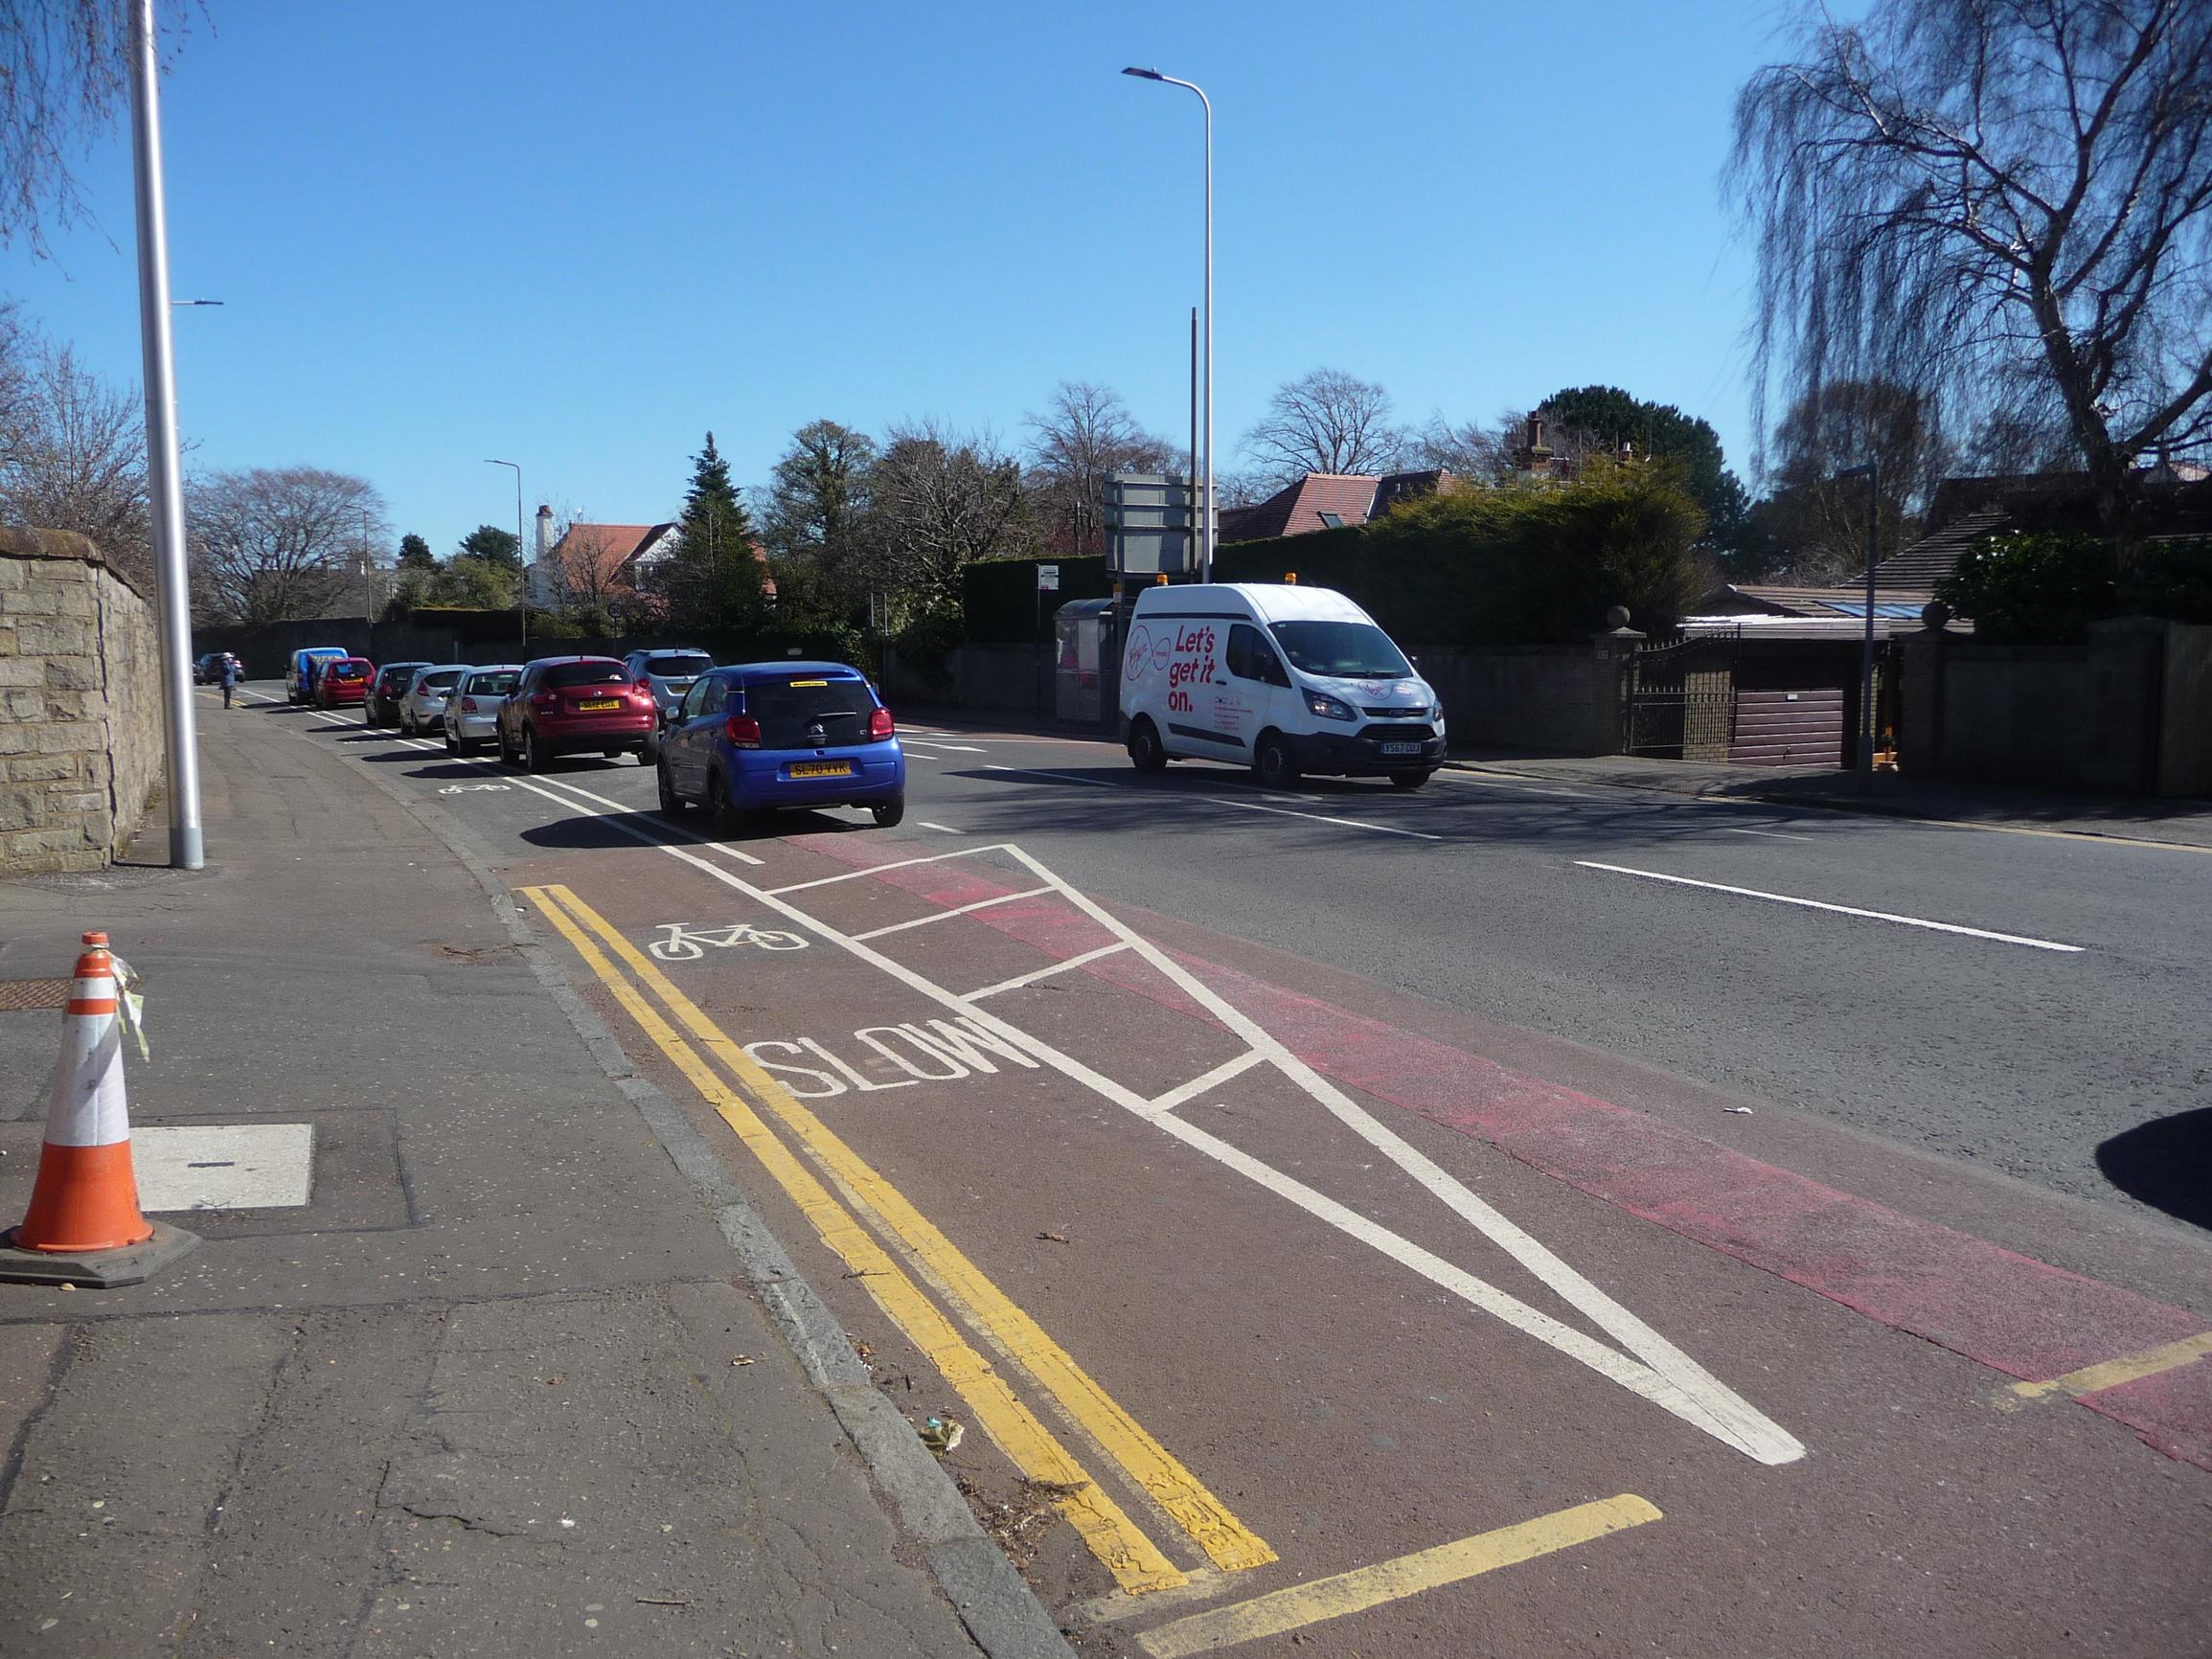 To install the cycle lane on the A70 Lanark Road in southwest Edinburgh, ‘floating’ parking bays have been created. The road’s speed limit has been cut from 40 to 30mph